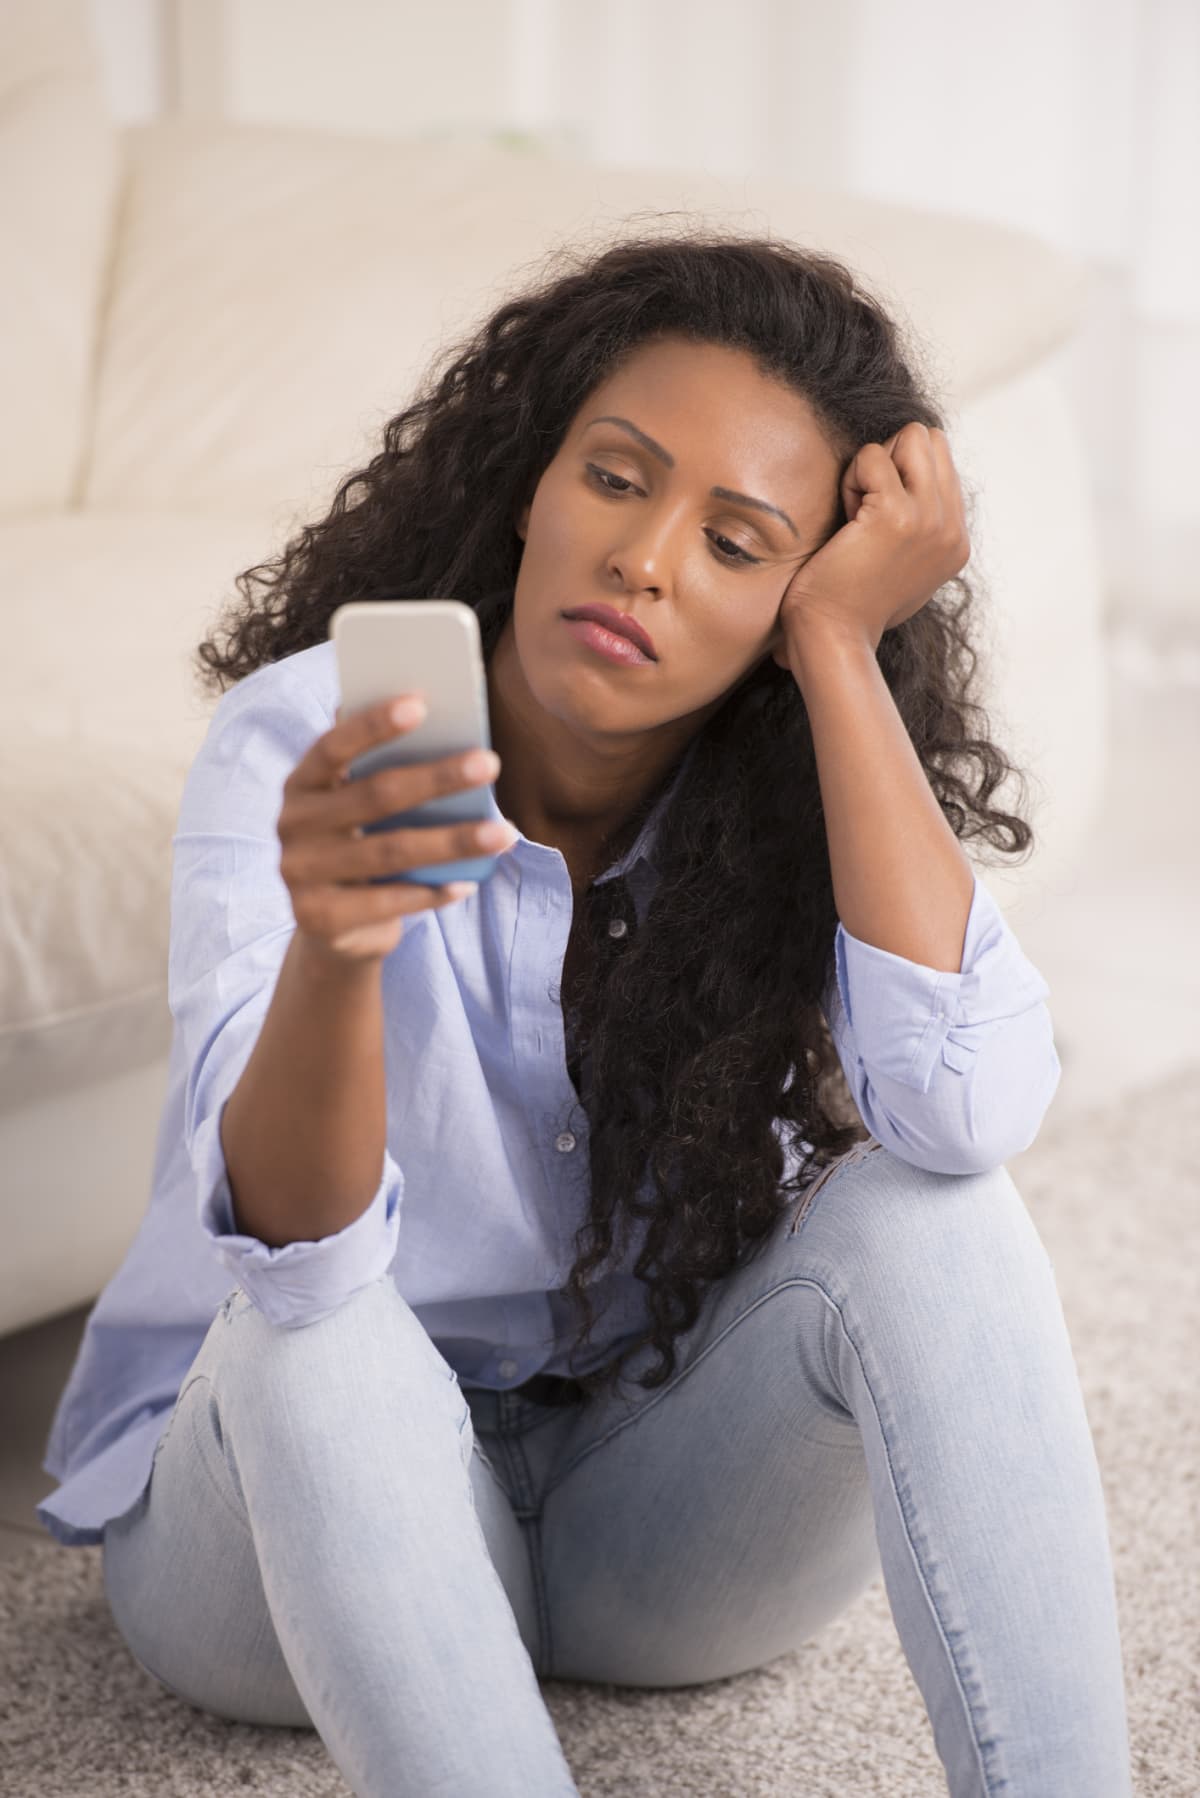 A woman looks forlorn while she stares at her smartphone screen.